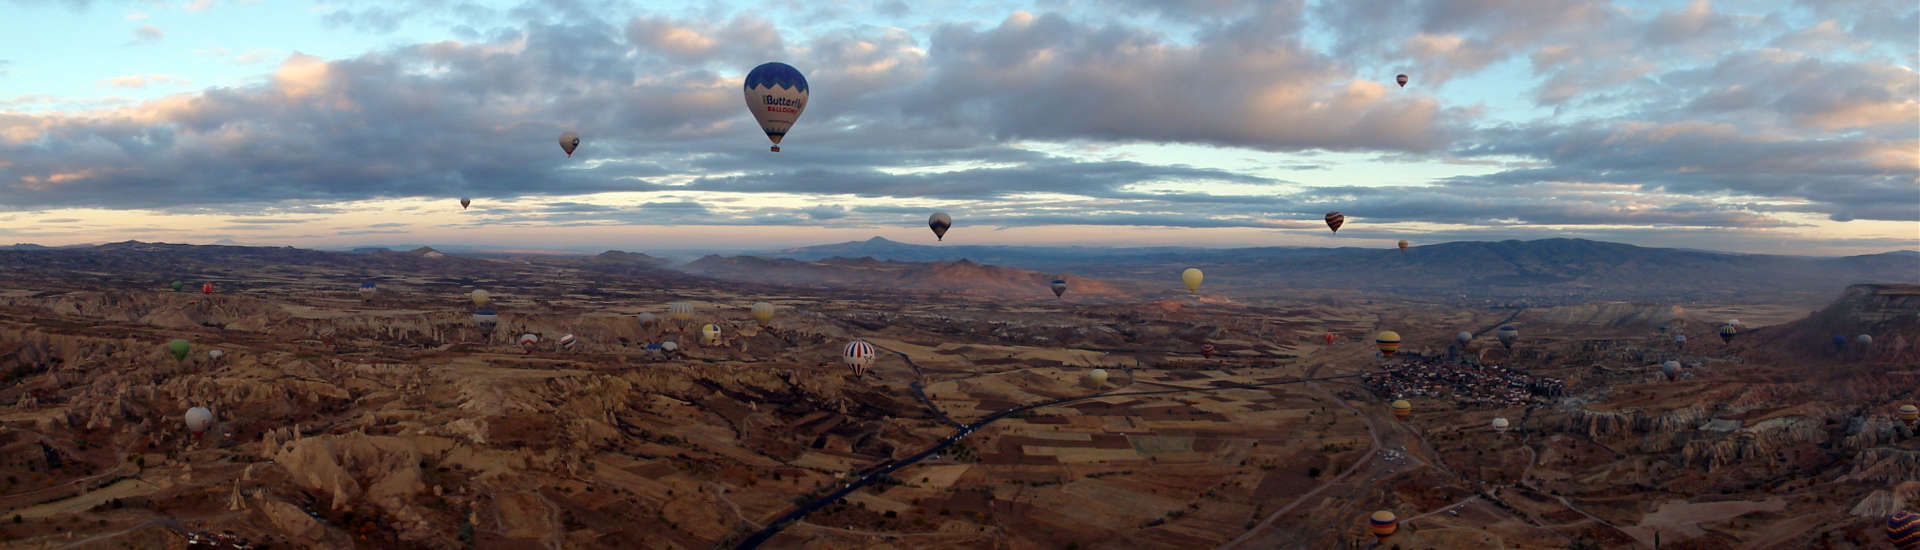 Panorama photo from hot air balloon with simple camera and its panorama function